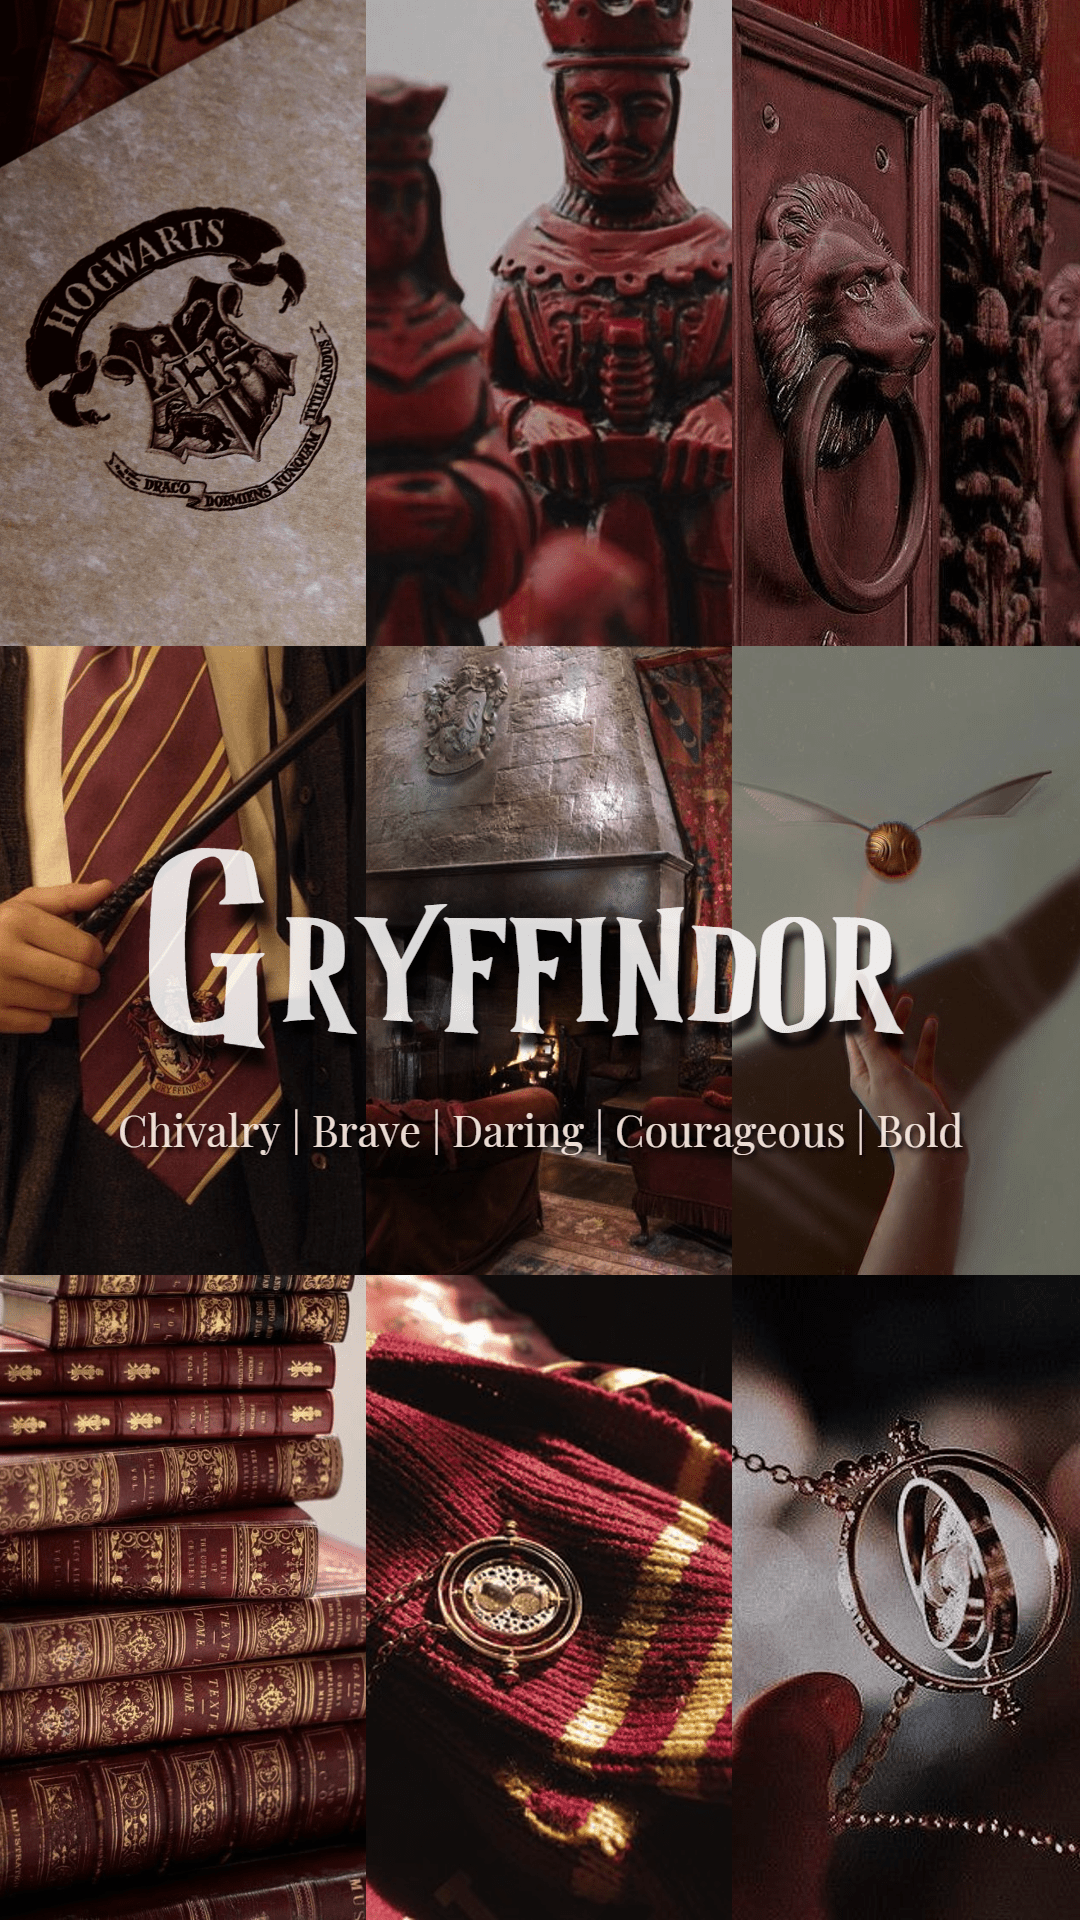 A collage of images representing the house of Gryffindor. - Gryffindor